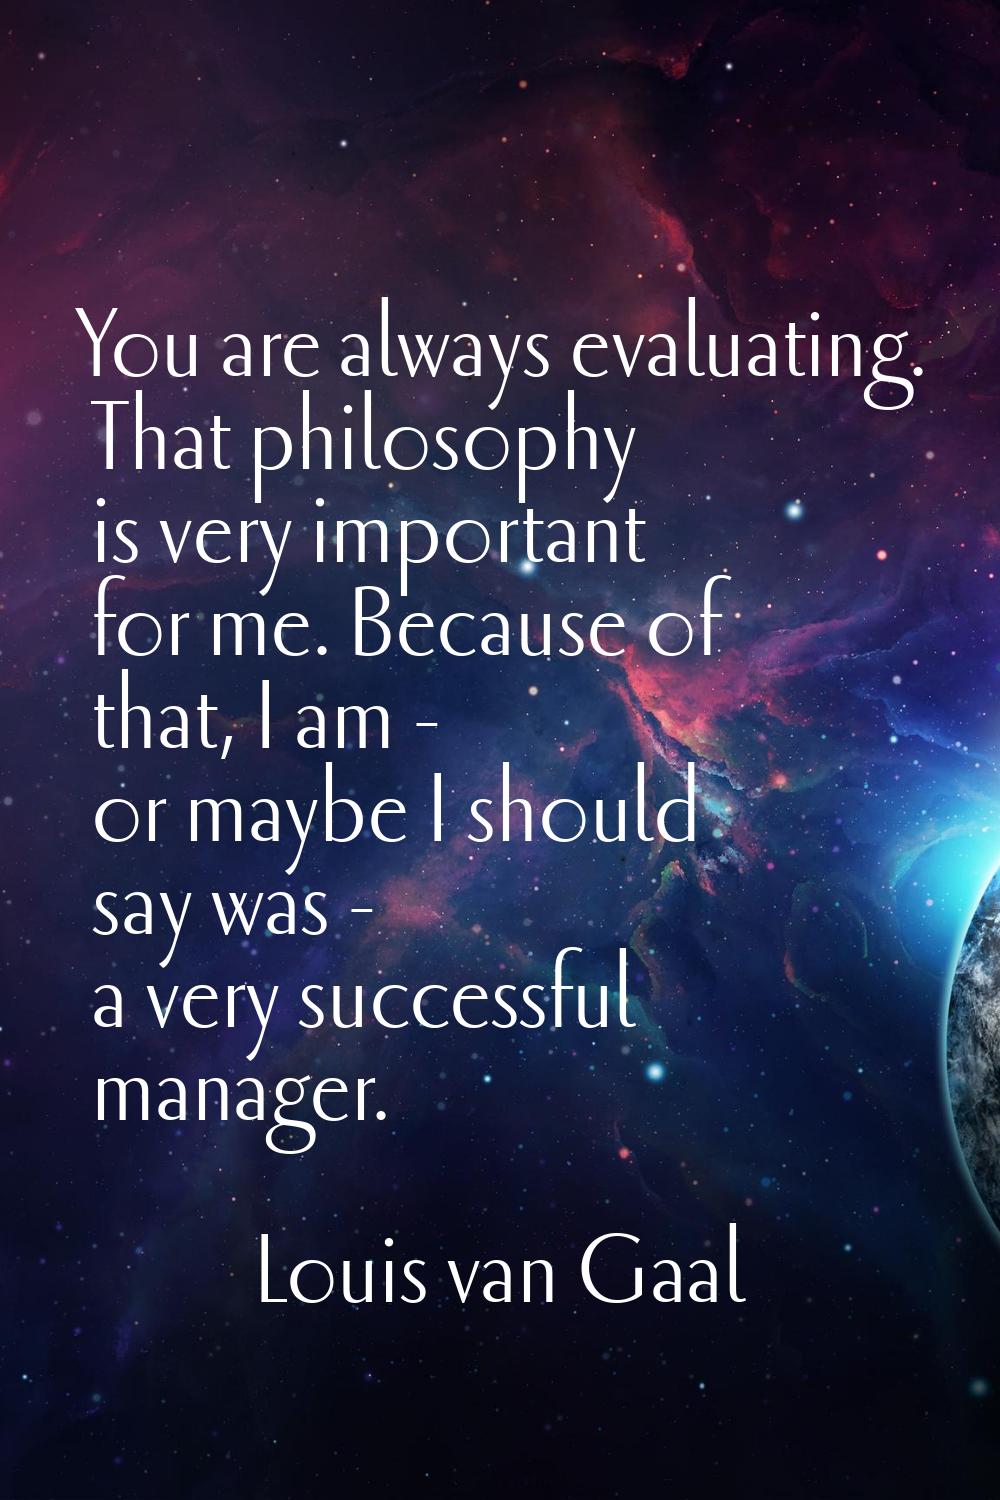 You are always evaluating. That philosophy is very important for me. Because of that, I am - or may